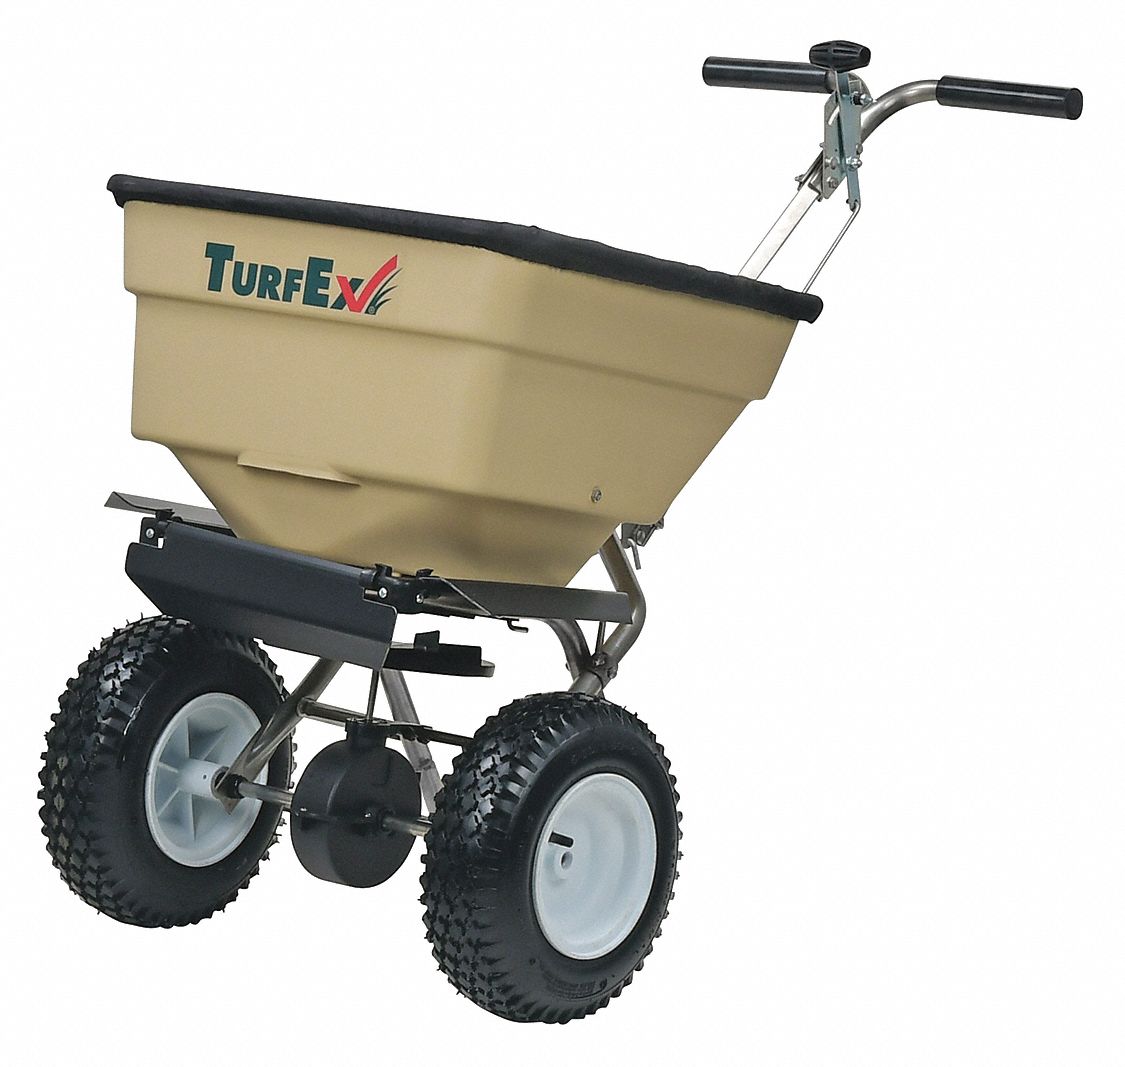 Spreader: 100 lb Capacity, Pneumatic, Broadcast, Manual Lever, Up to 12 ft